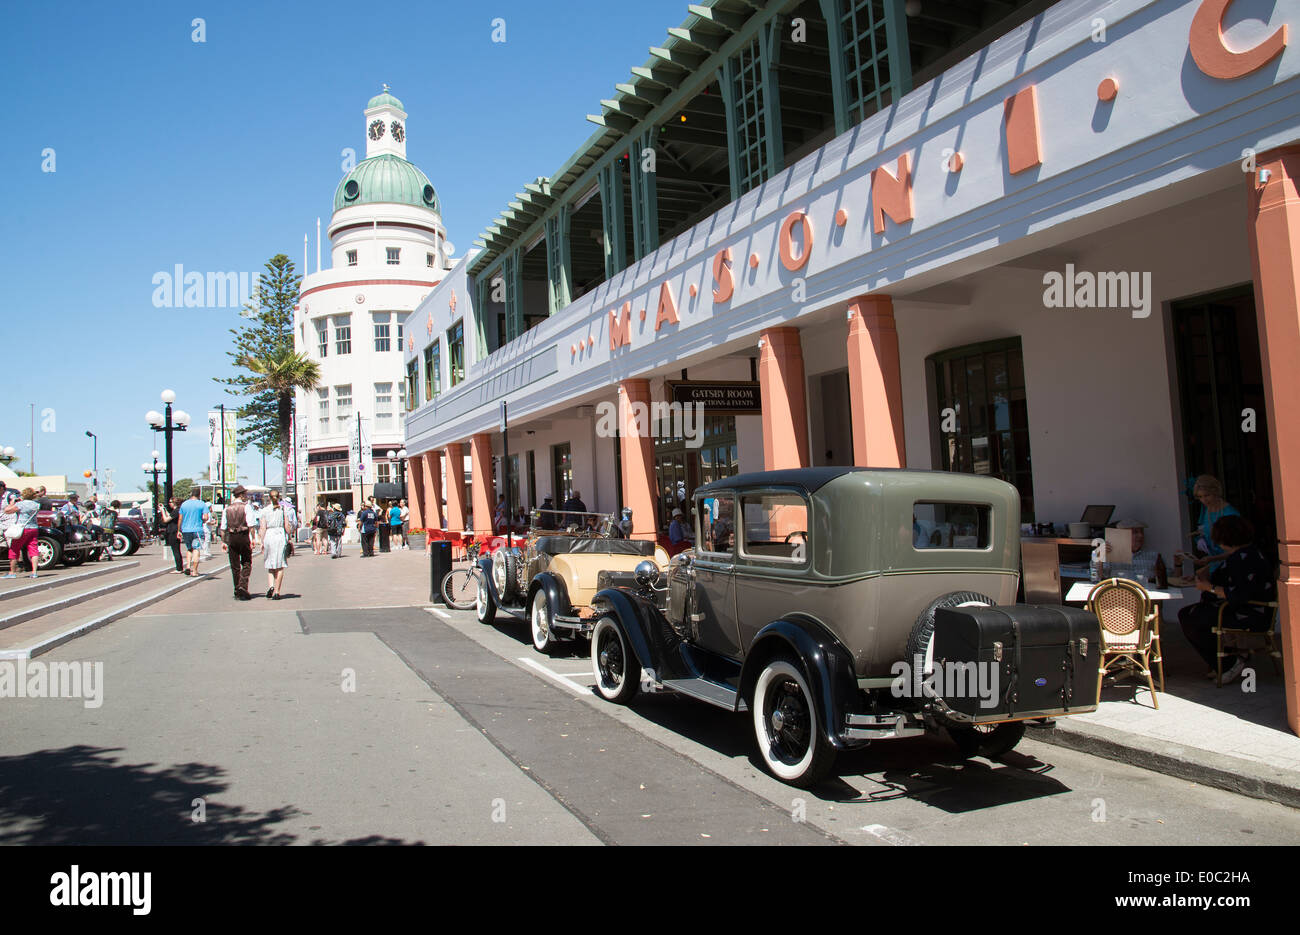 Classic vintage cars outside the Masonic Hotel in the art deco town of Napier New Zealand An annual event attracting visitors Stock Photo